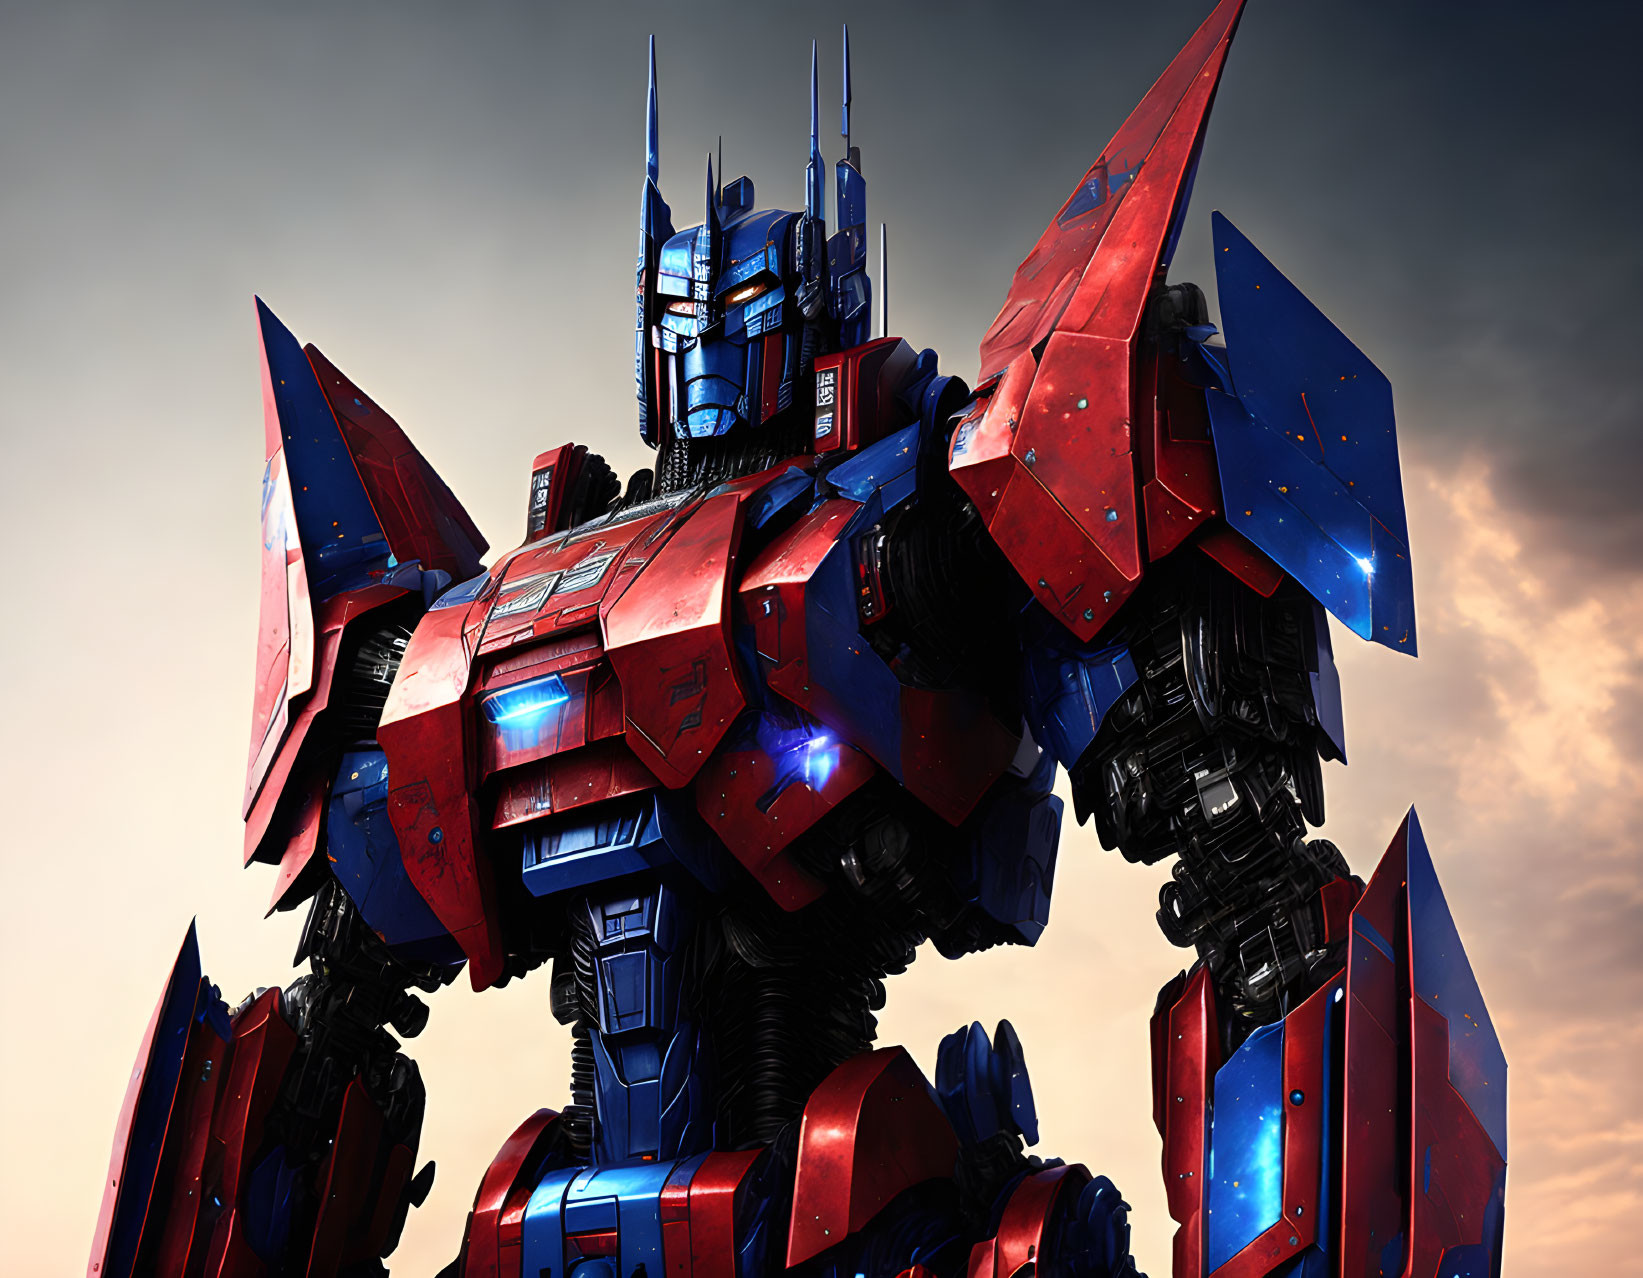 Large Red and Blue Robot Illustration with Dramatic Sky